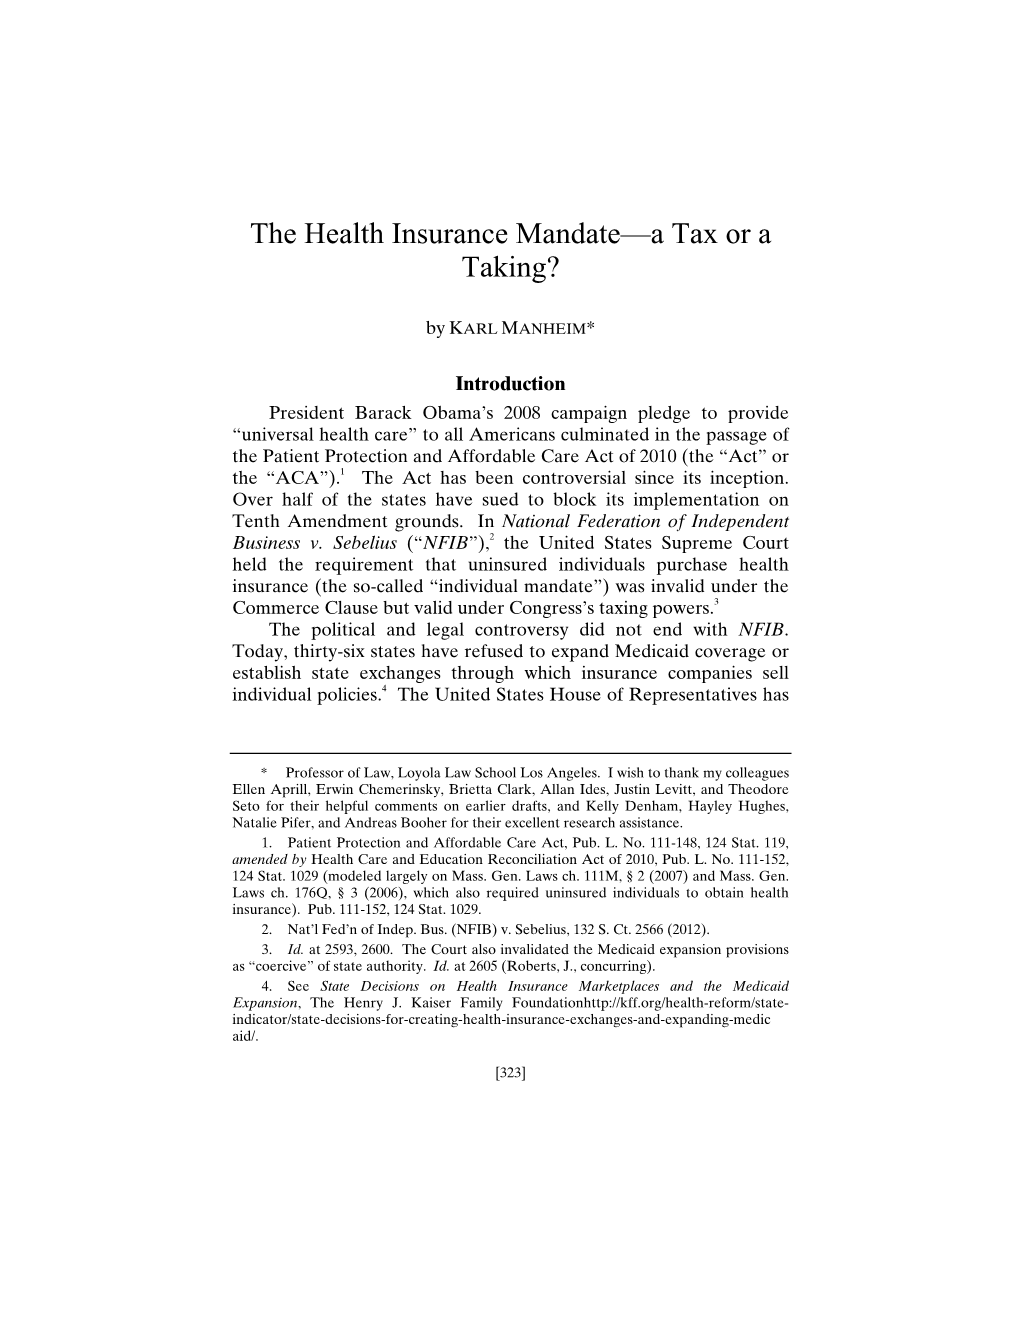 The Health Insurance Mandate—A Tax Or a Taking?